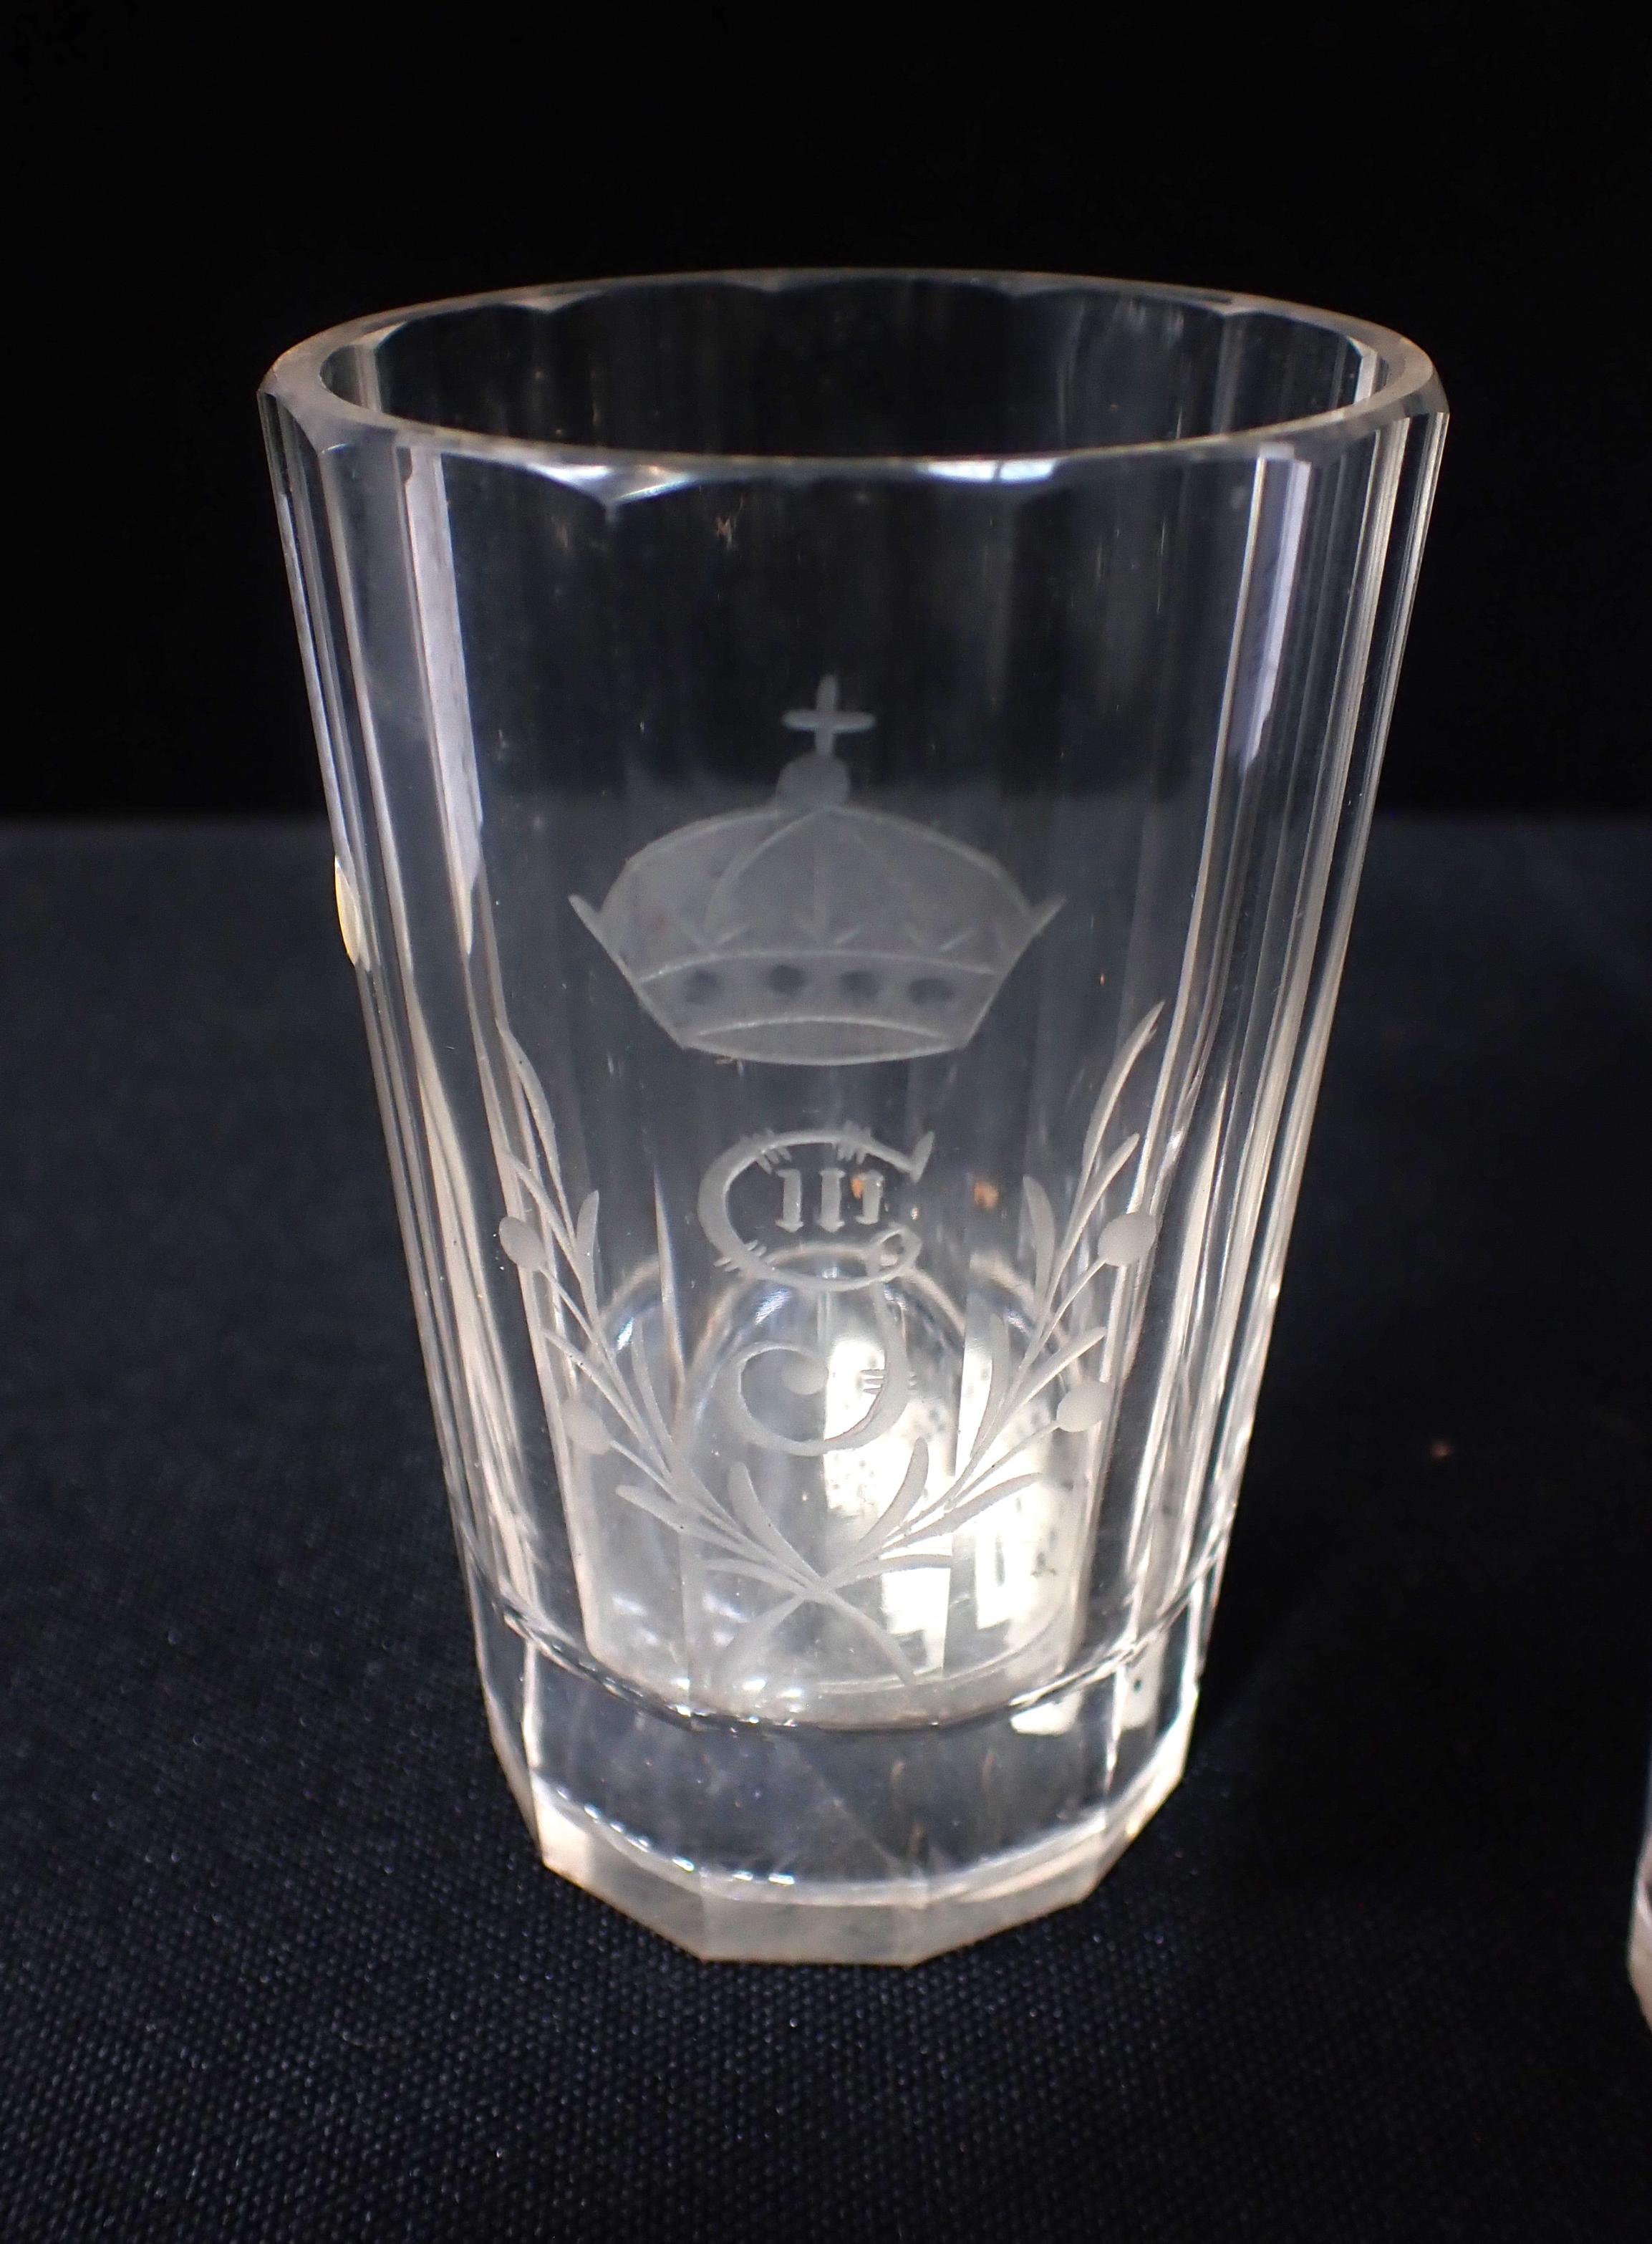 TWO GLASS DICE GAMING BEAKERS - Image 2 of 6